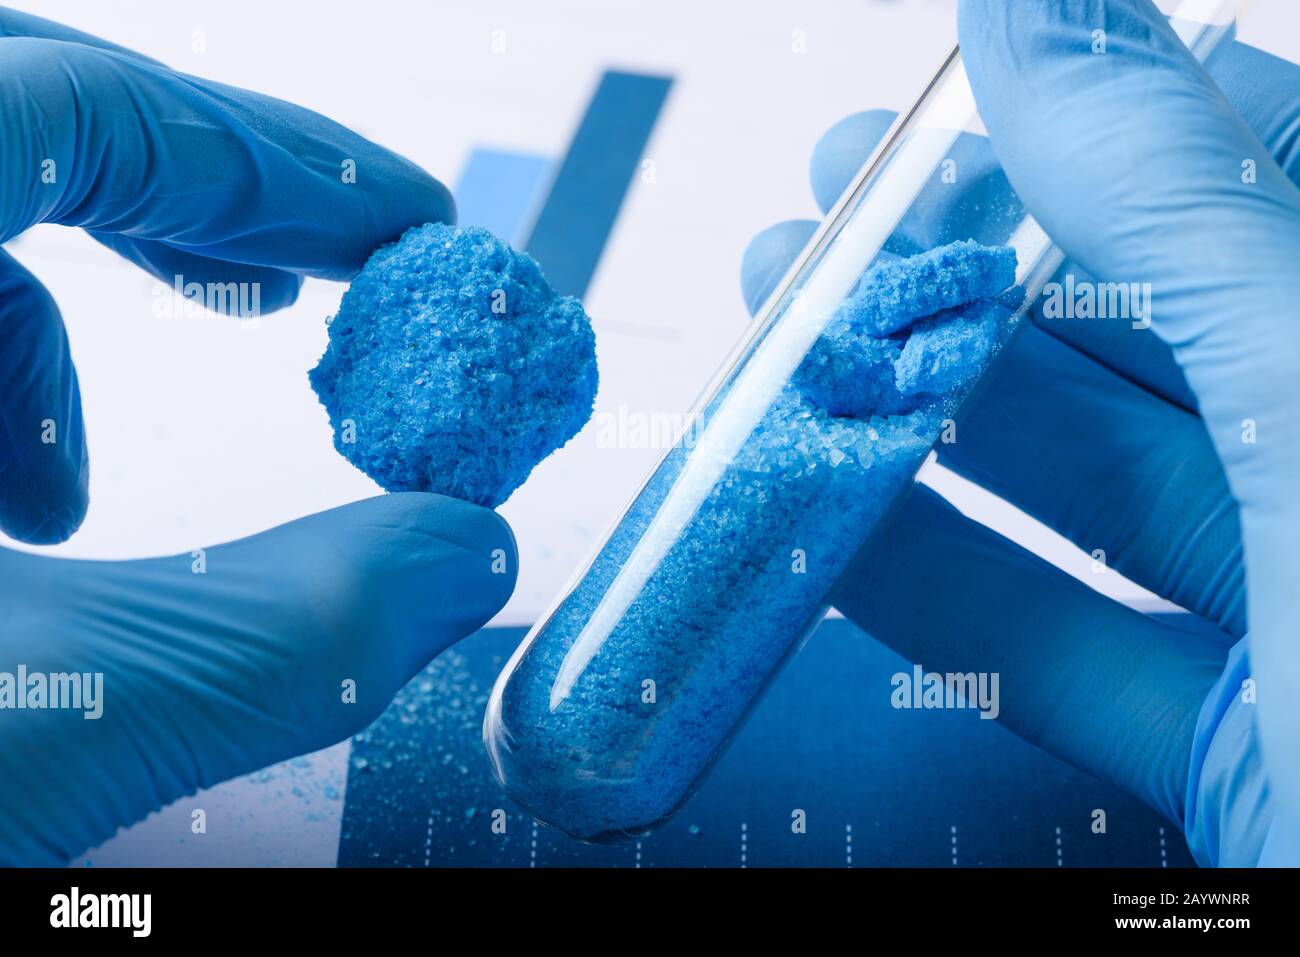 Researcher show blue crystal material in hand and glass test tube in laboratory Stock Photo